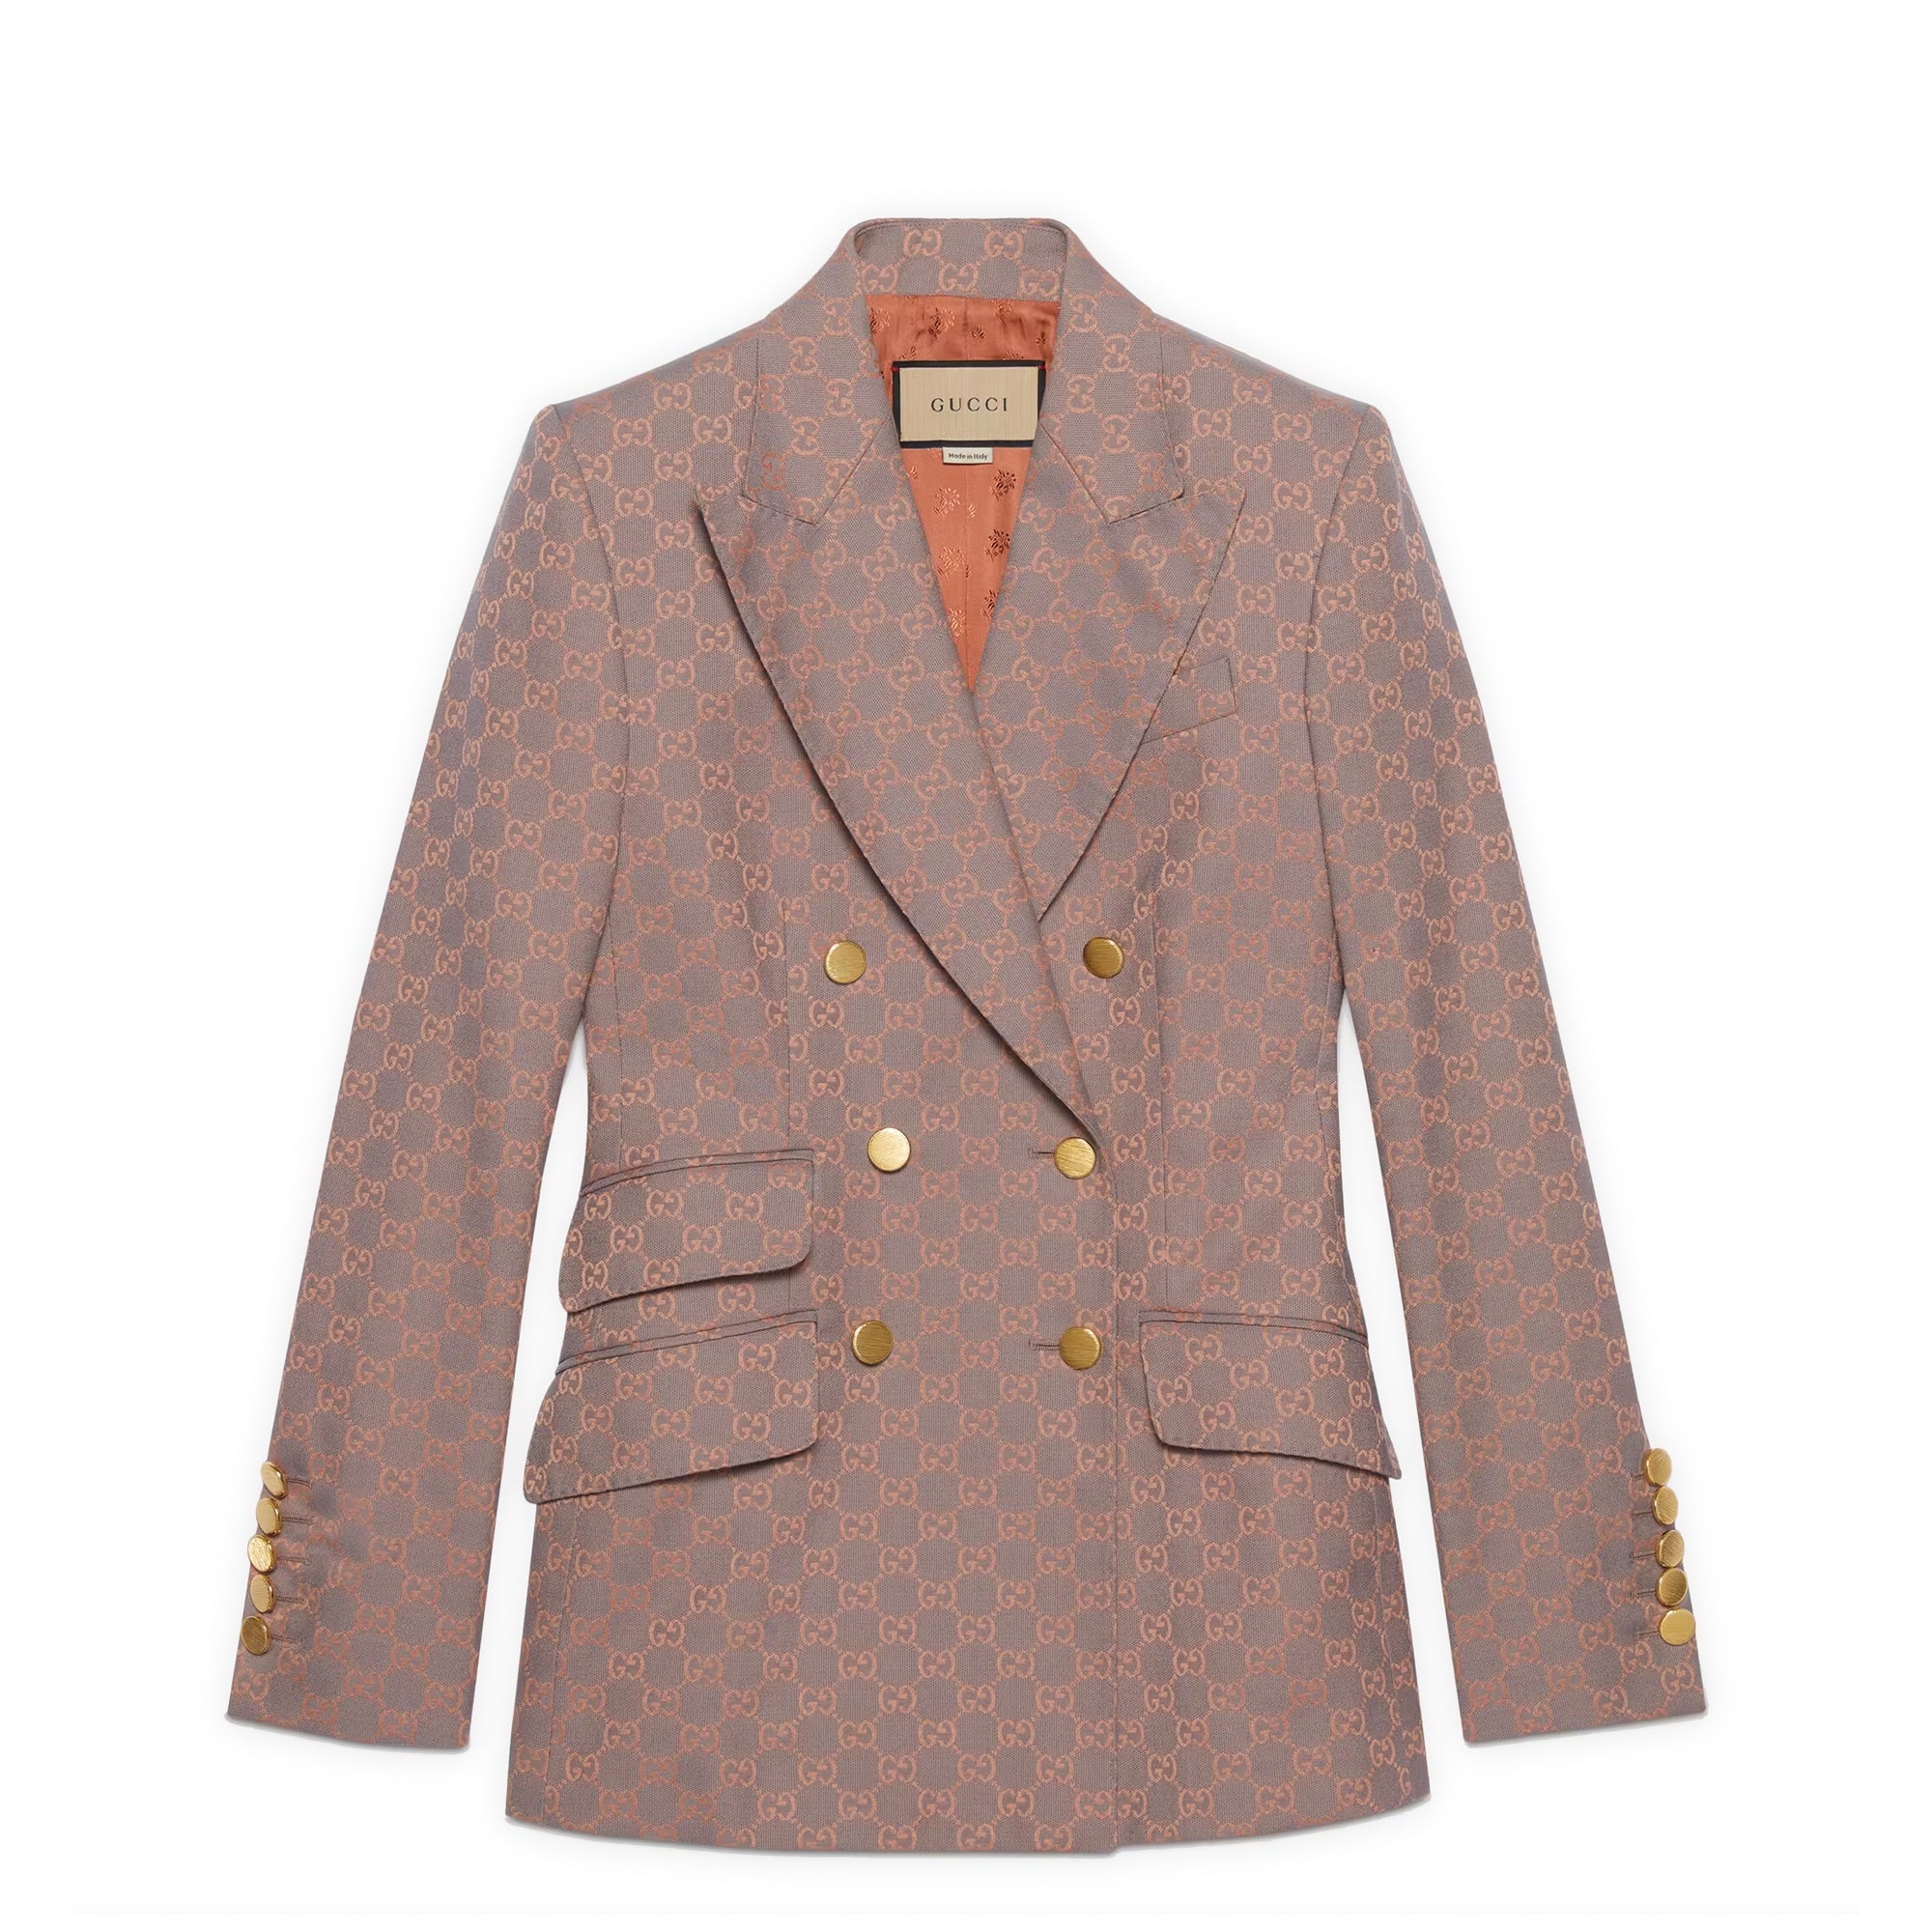 Gucci - Women’s GG Cotton Canvas Jacket - (Grey/Pink) view 1